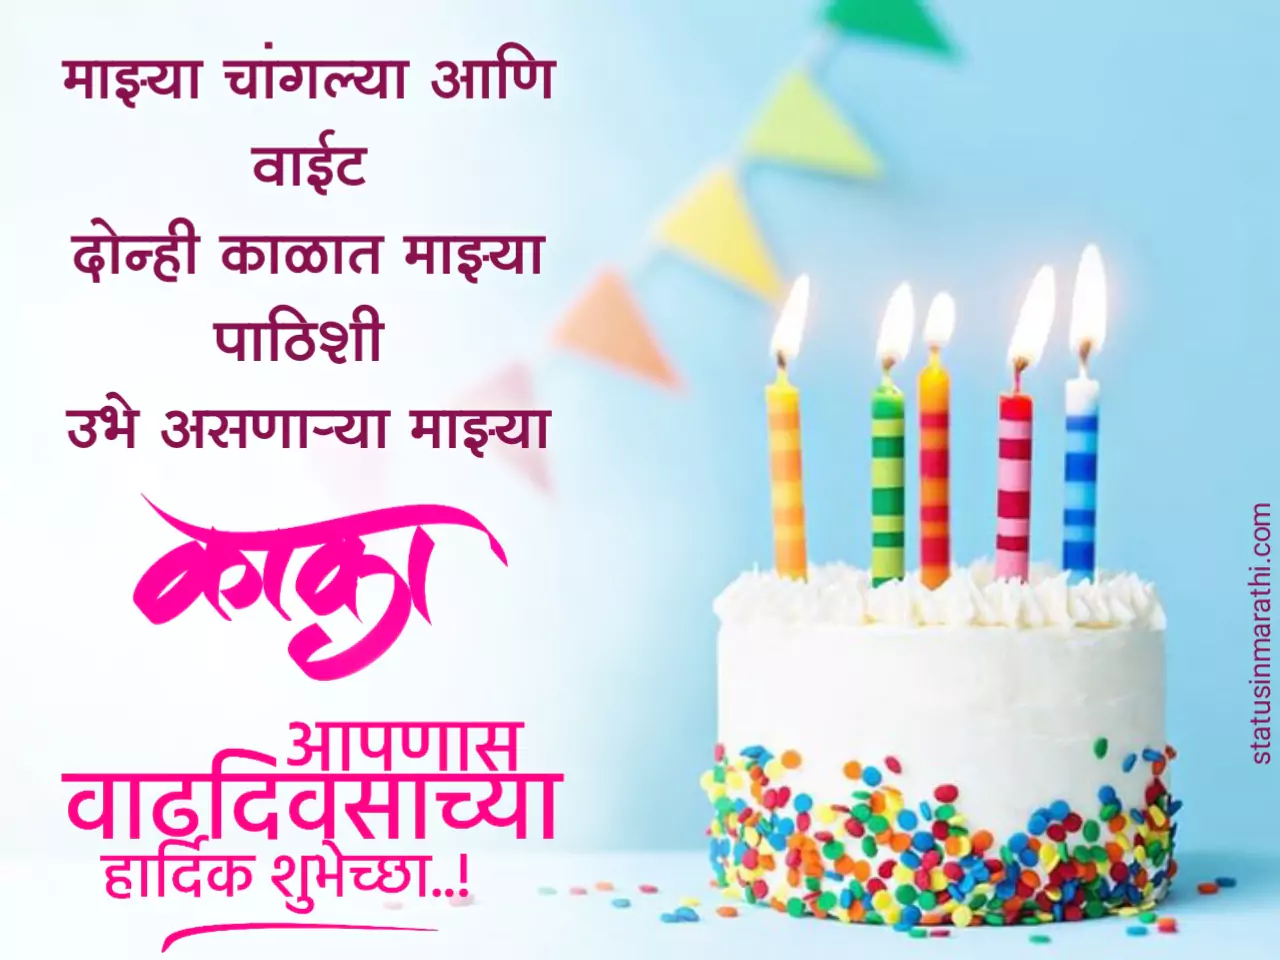 Happy Birthday wishes for uncle in marathi